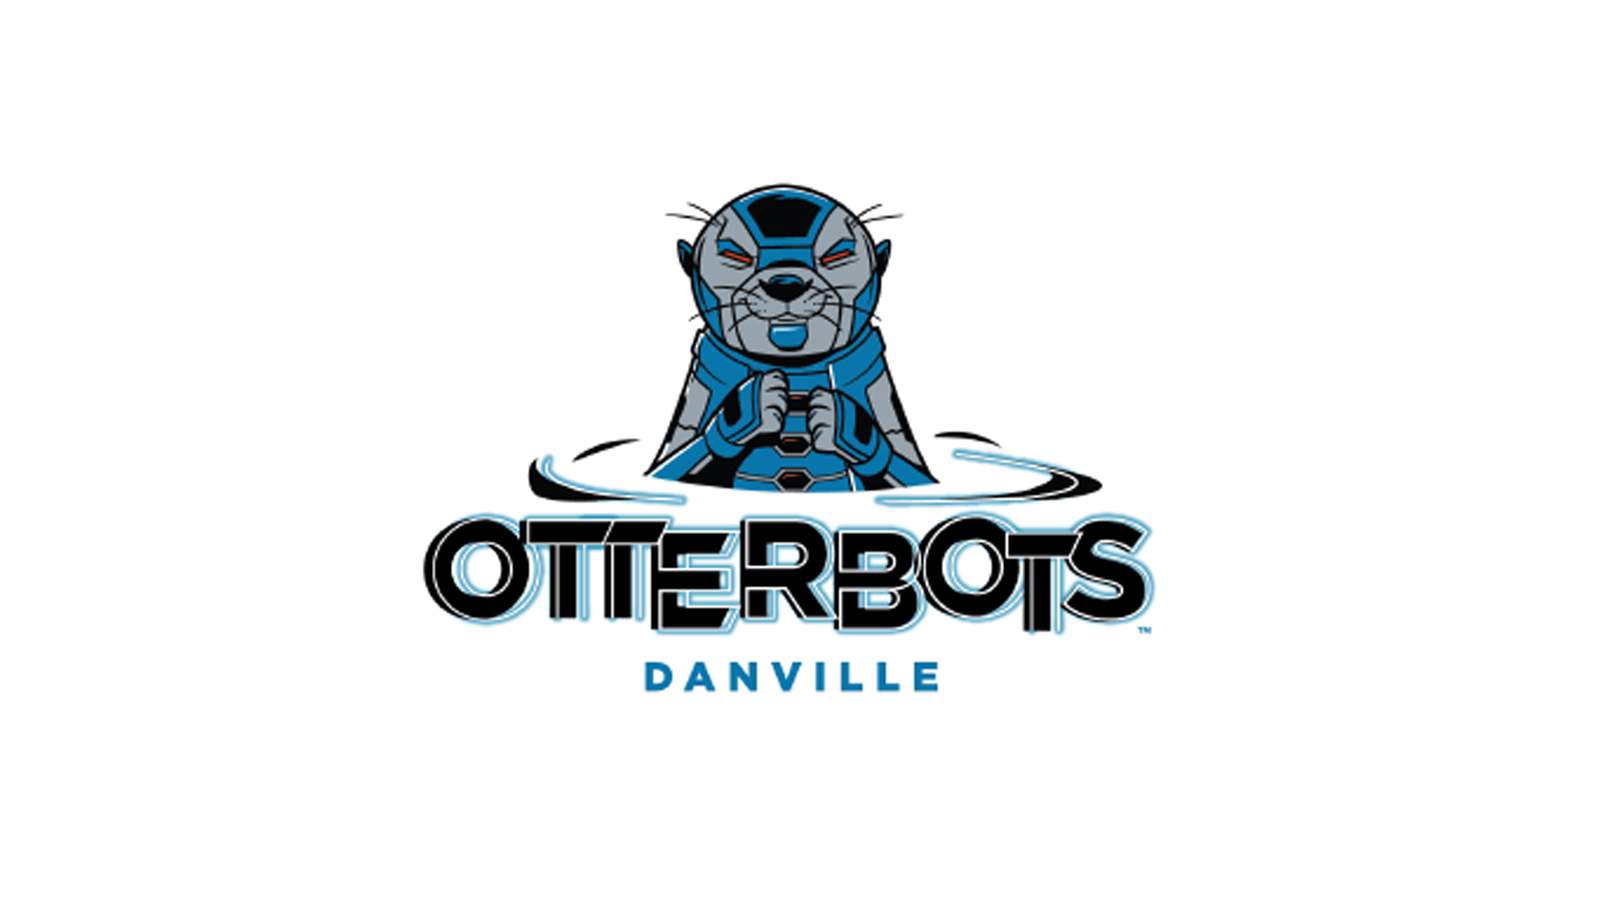 Danville Baseball Club introduces Danville Otterbots as new team name